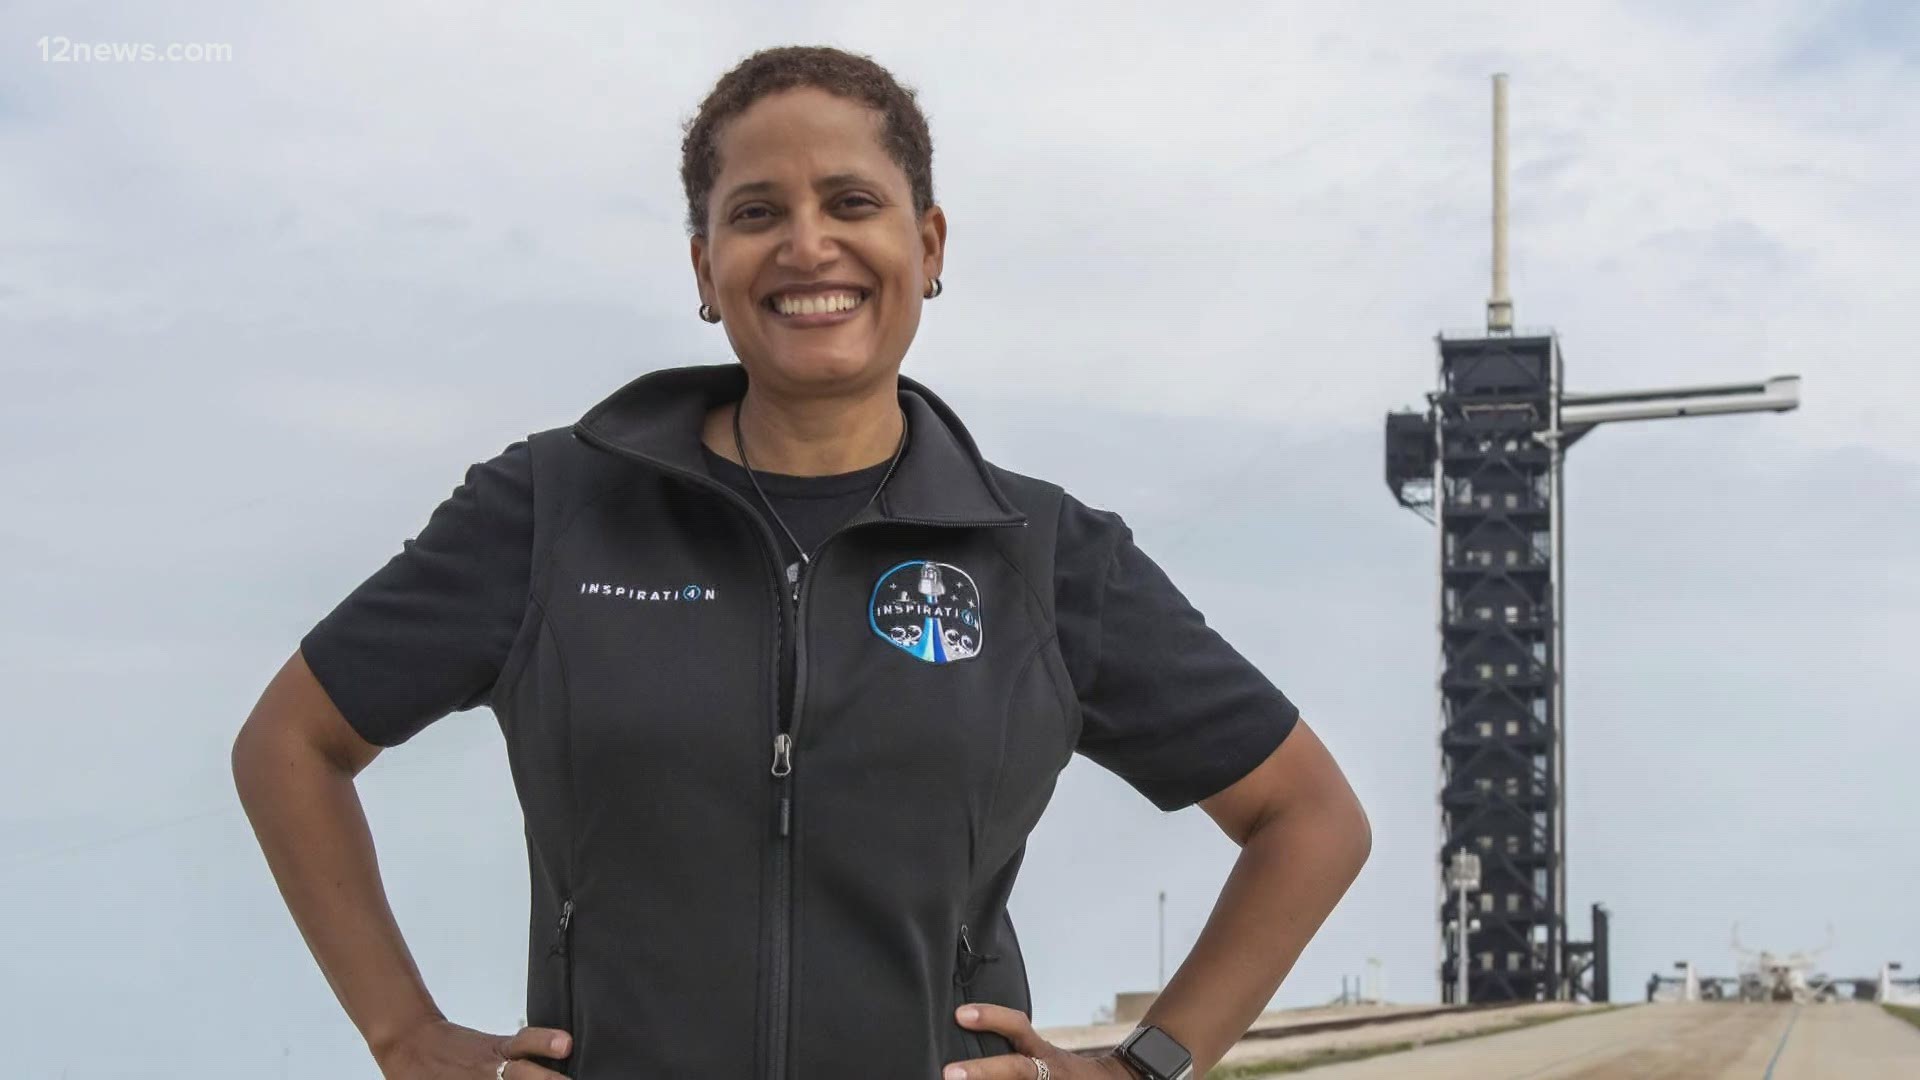 In T-minus 48 hours a Valley professor is heading into space! Dr. Sian Proctor is part of an all-civilian crew going into space to support St. Jude's.